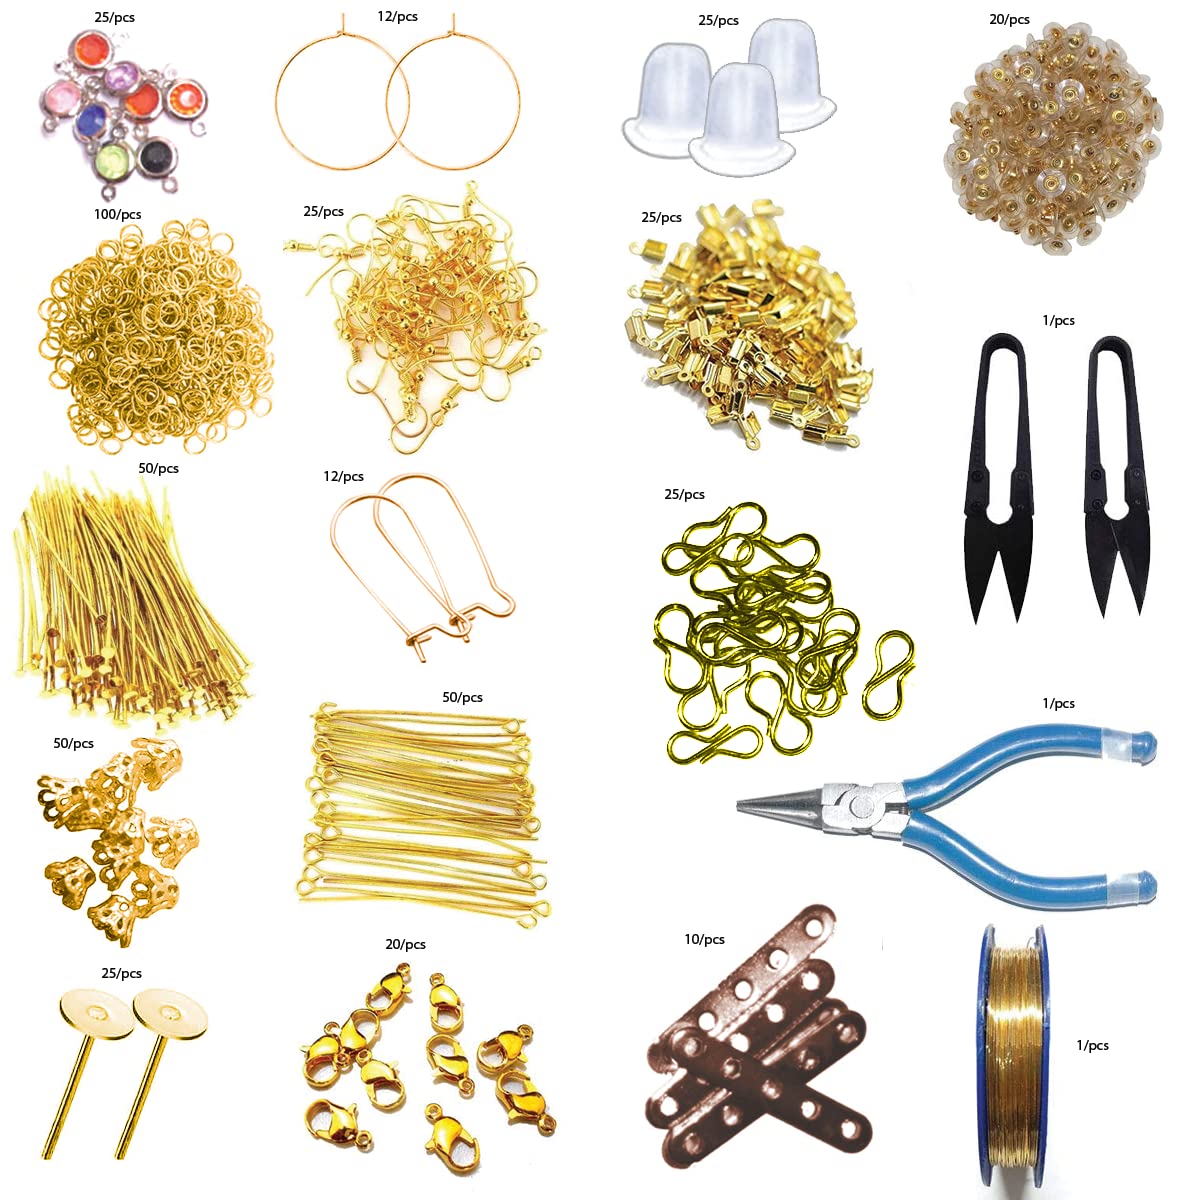 Jewelry tools and materials